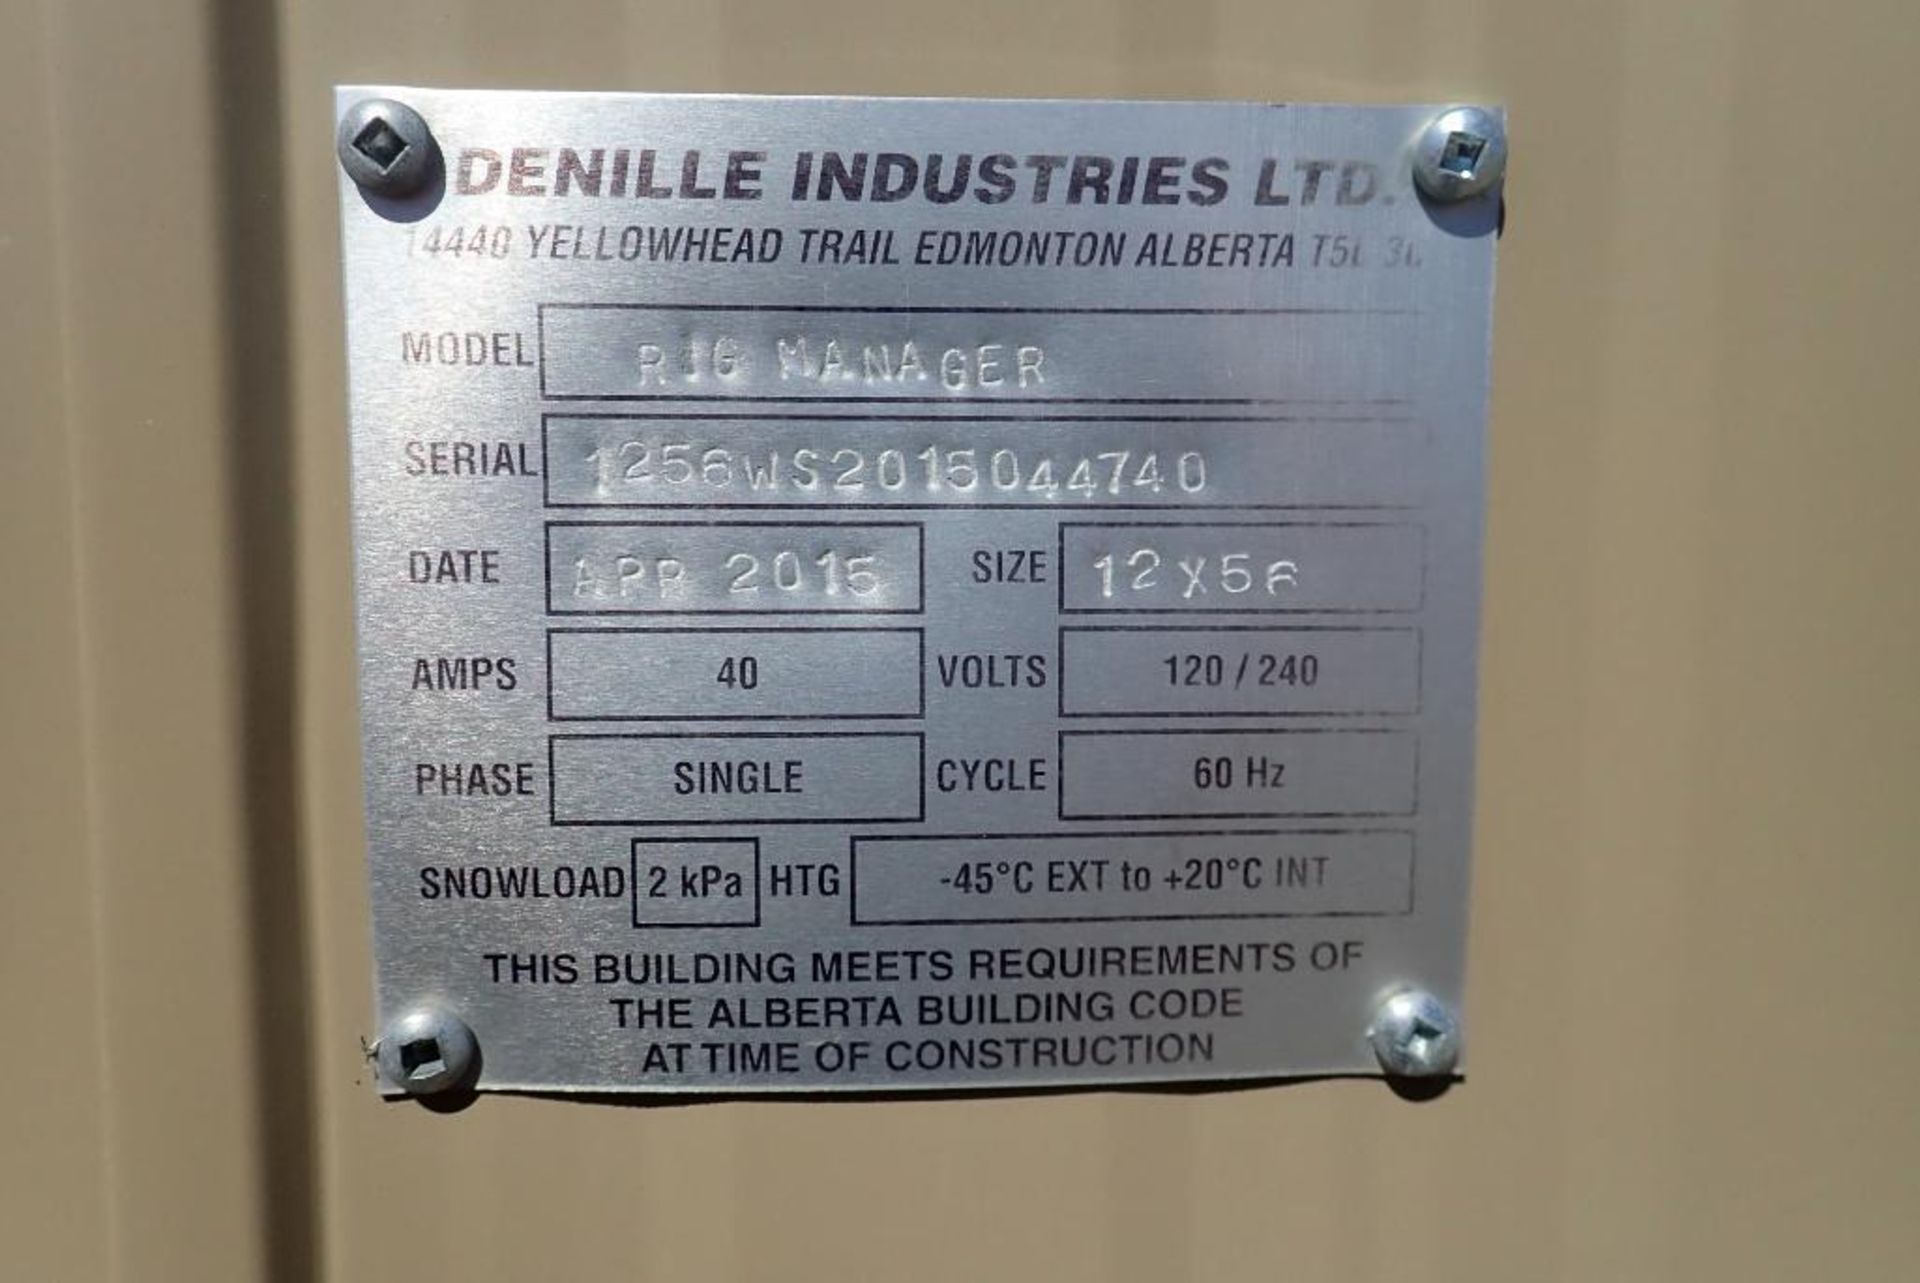 2015 Denille Industries 12'x56' Skidded Rig Manager Shack. SN 1256WS2015044740. - Image 19 of 19